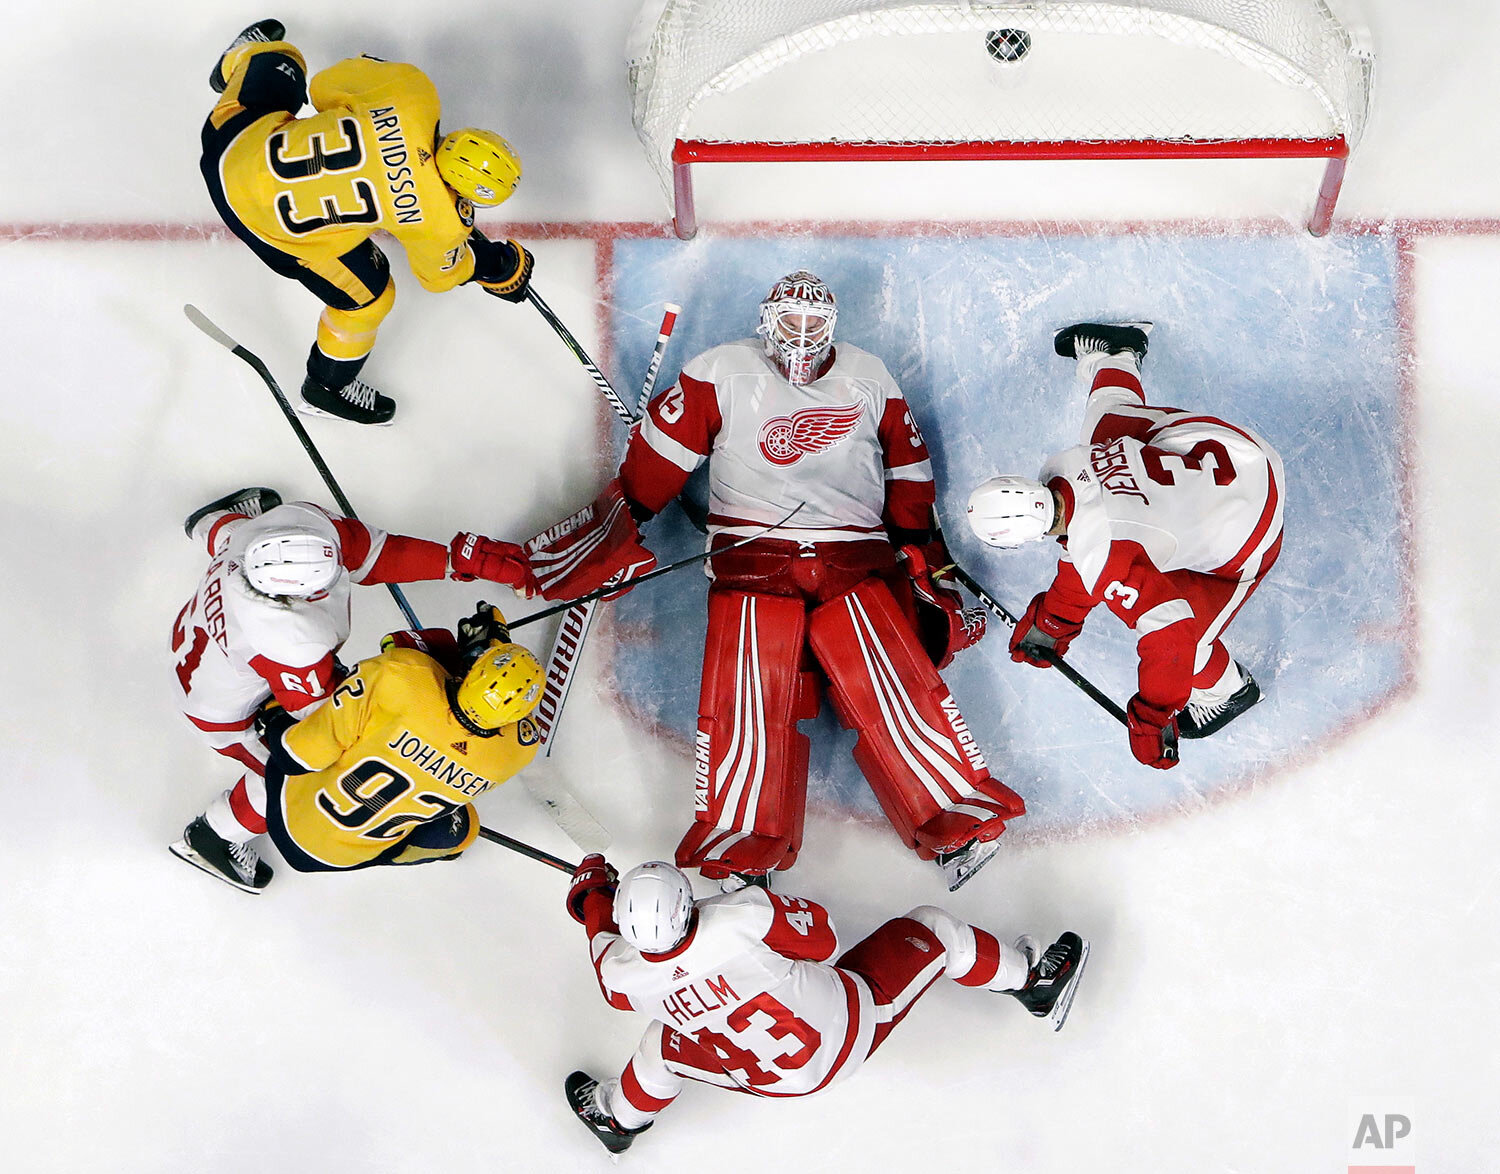  Detroit Red Wings goaltender Jimmy Howard (35) covers the puck during the third period of the team's NHL hockey game against the Nashville Predators in Nashville, Tenn. on Feb. 12, 2019. The Red Wings won 3-2. (AP Photo/Mark Humphrey) 